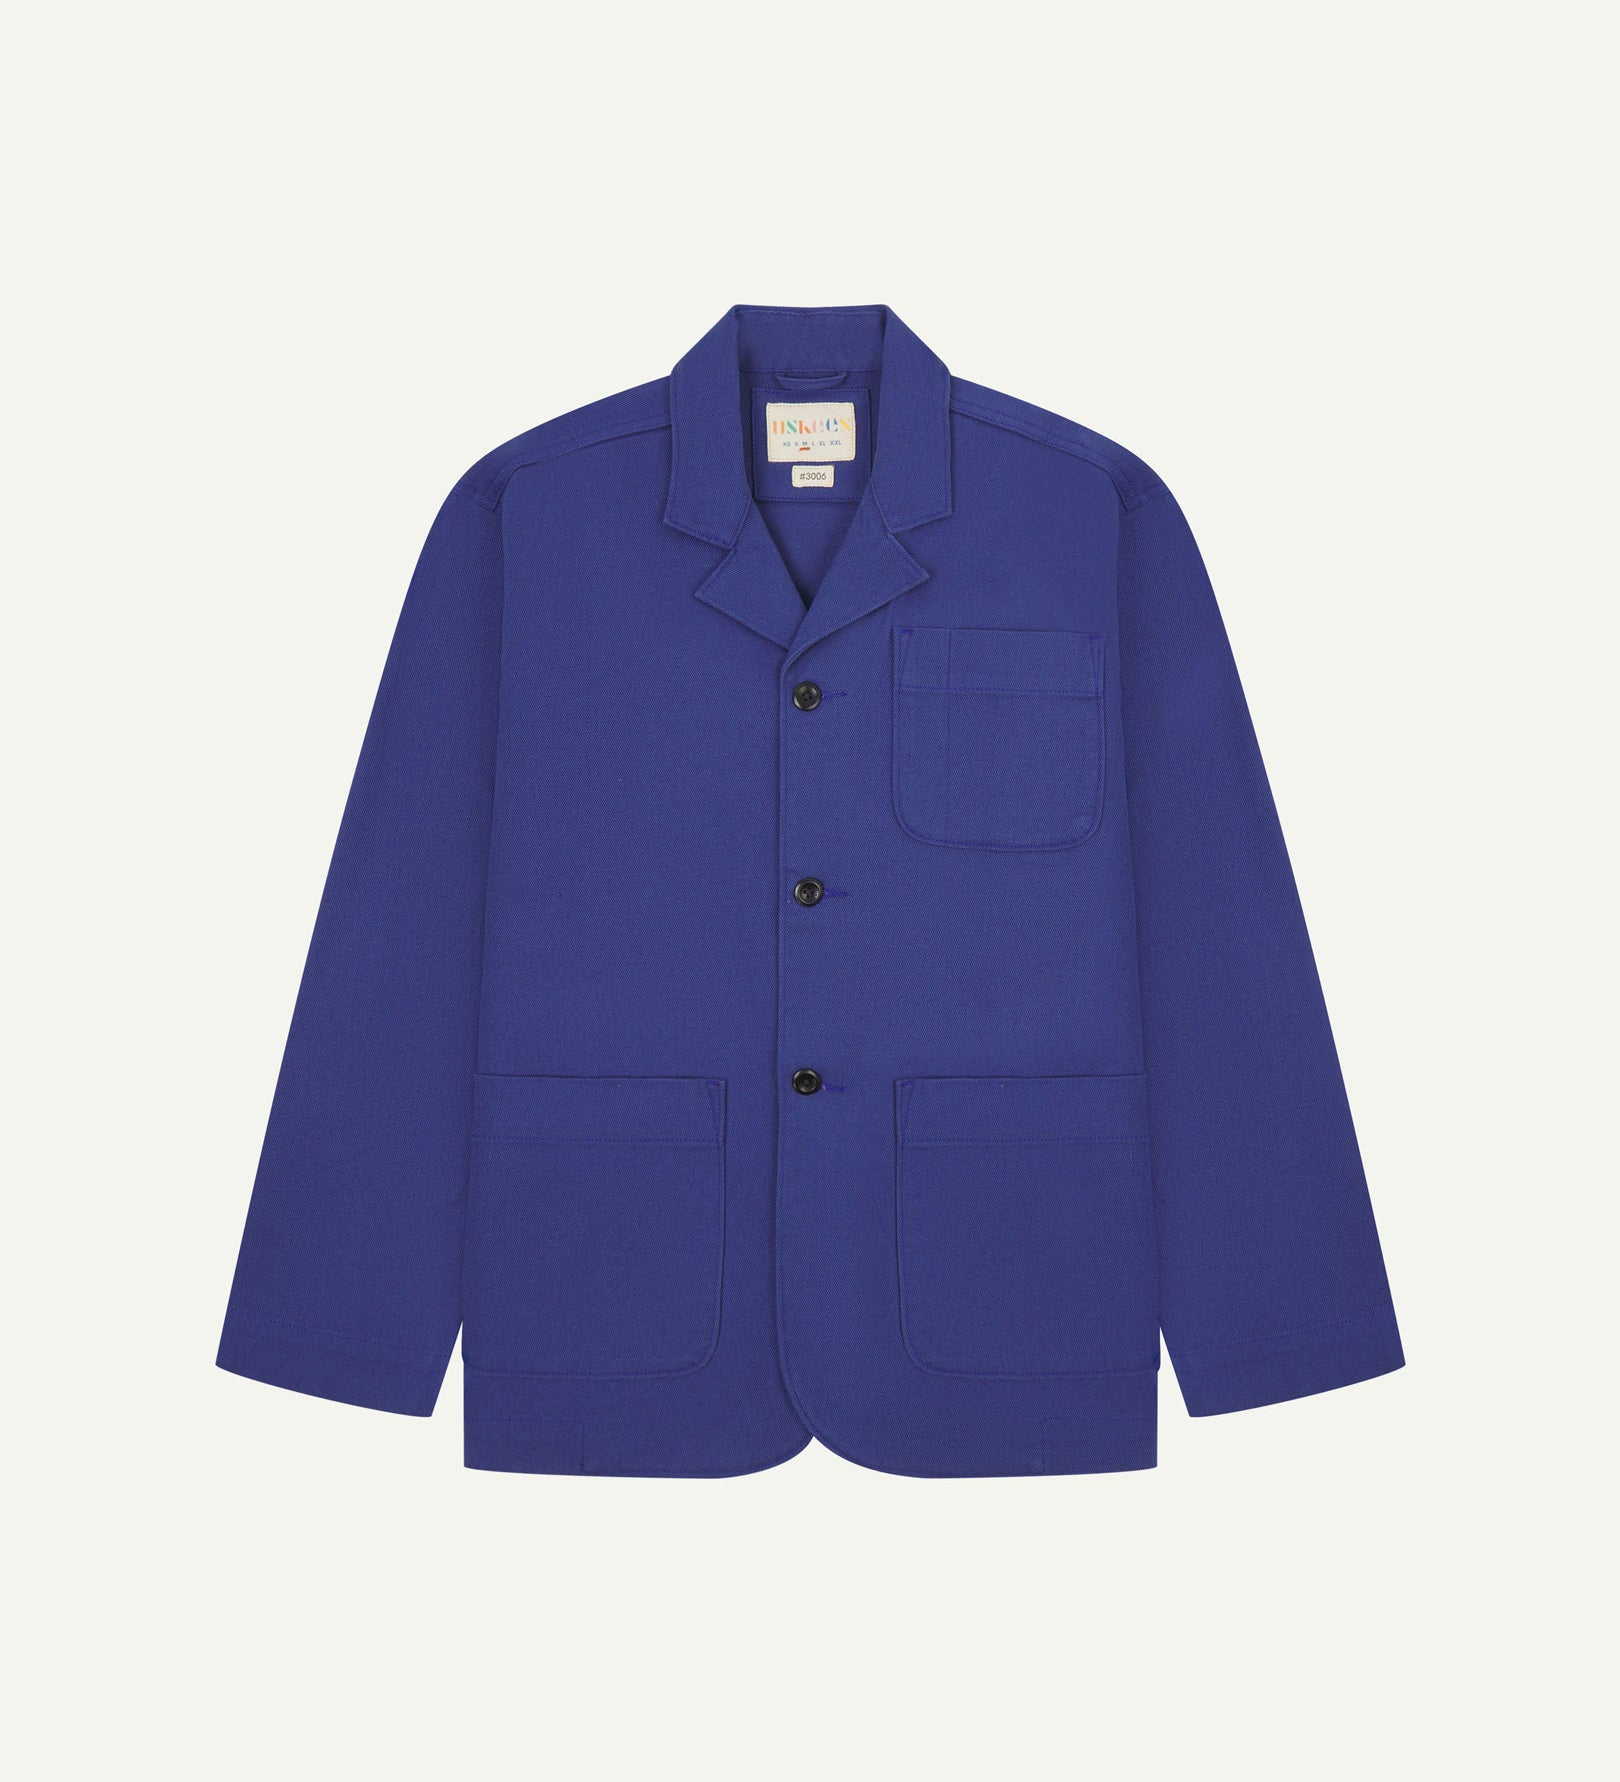 Ultra blue buttoned organic cotton-drill blazer from Uskees with clear view of three patch pockets and Uskees branding label.